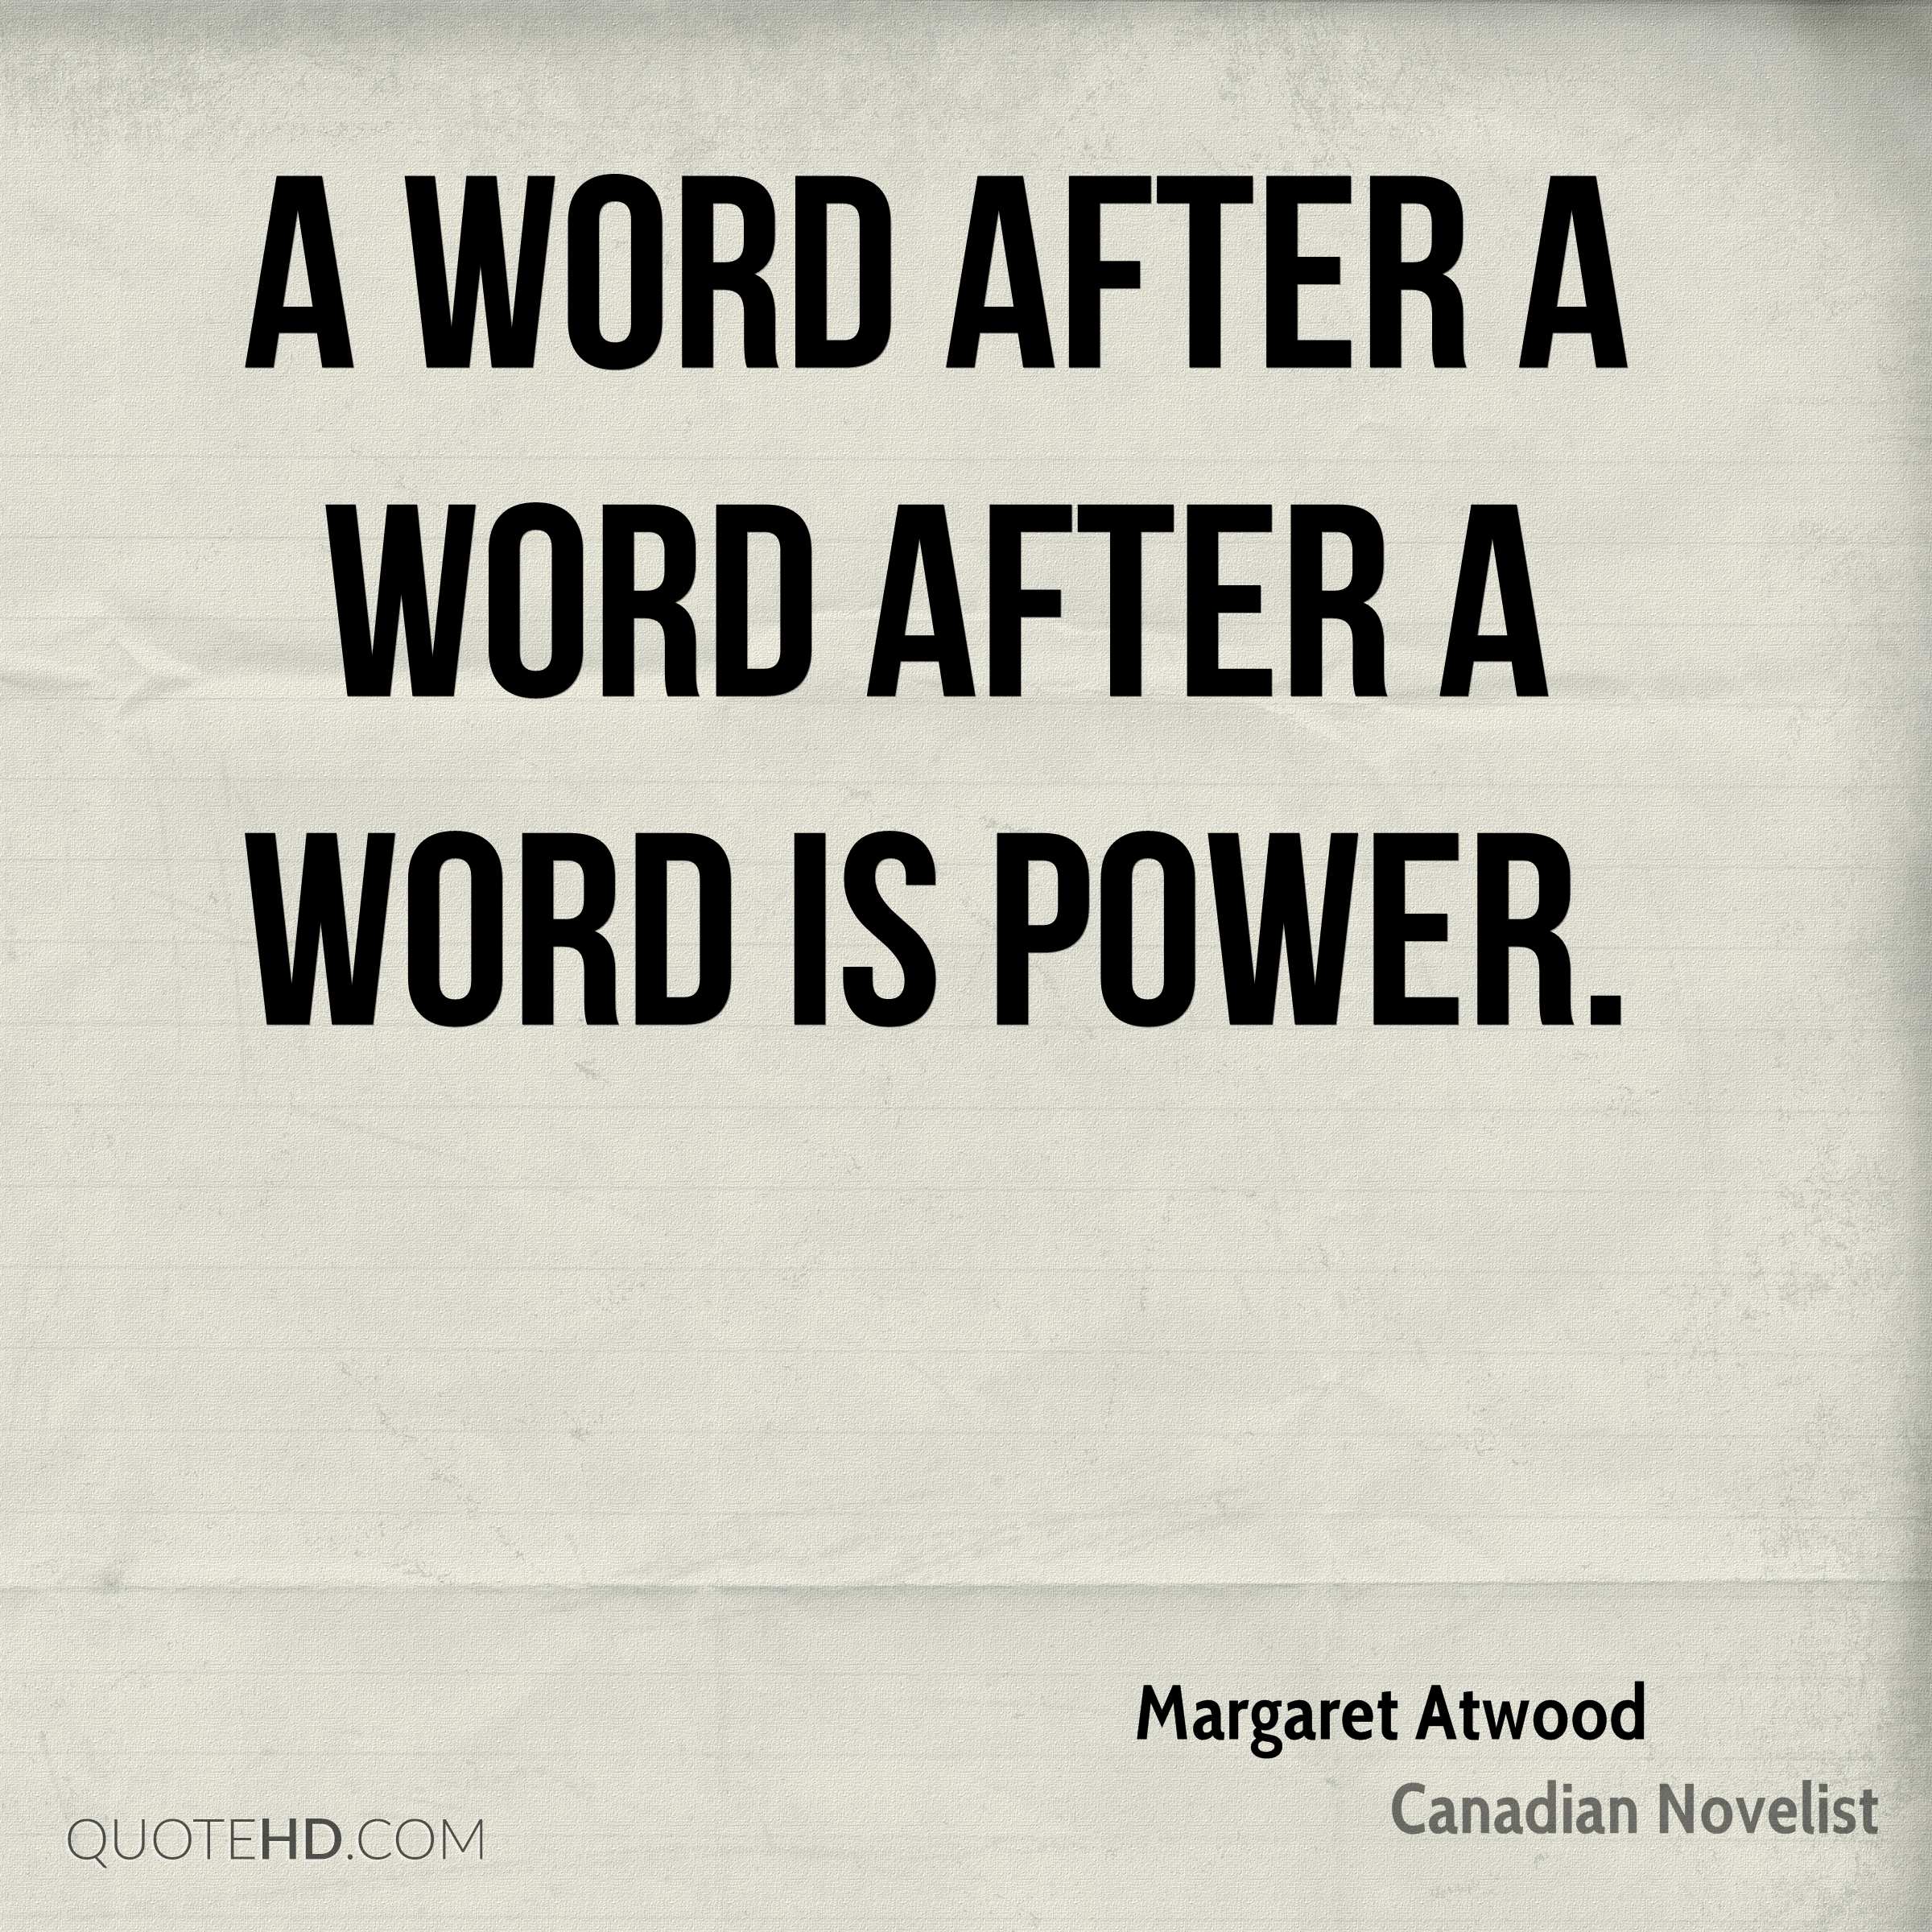 margaret-atwood-margaret-atwood-a-word-after-a-word-after-a-word-is